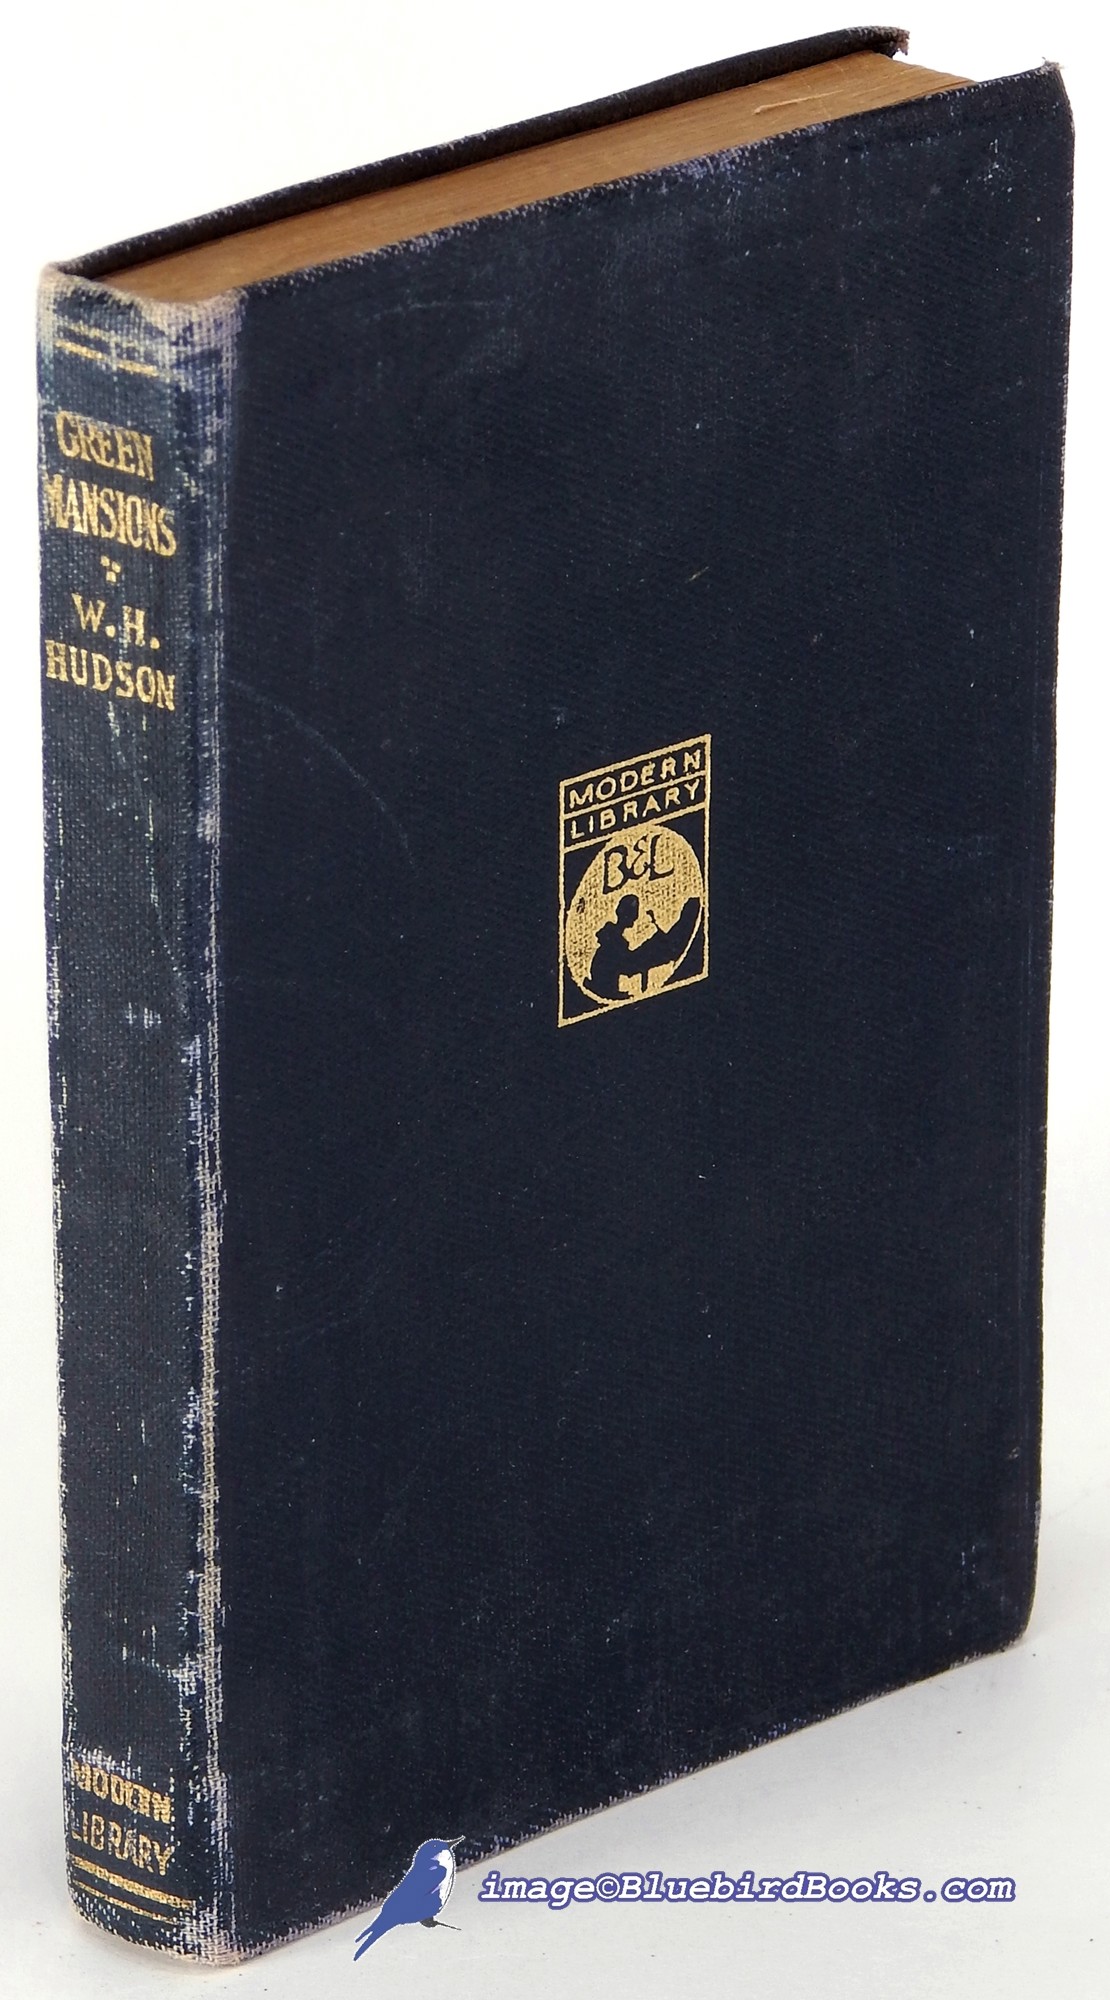 HUDSON, W. H. - Green Mansions: A Romance of the Tropical Forest (Modern Library Spine #3, ML #89. 1)